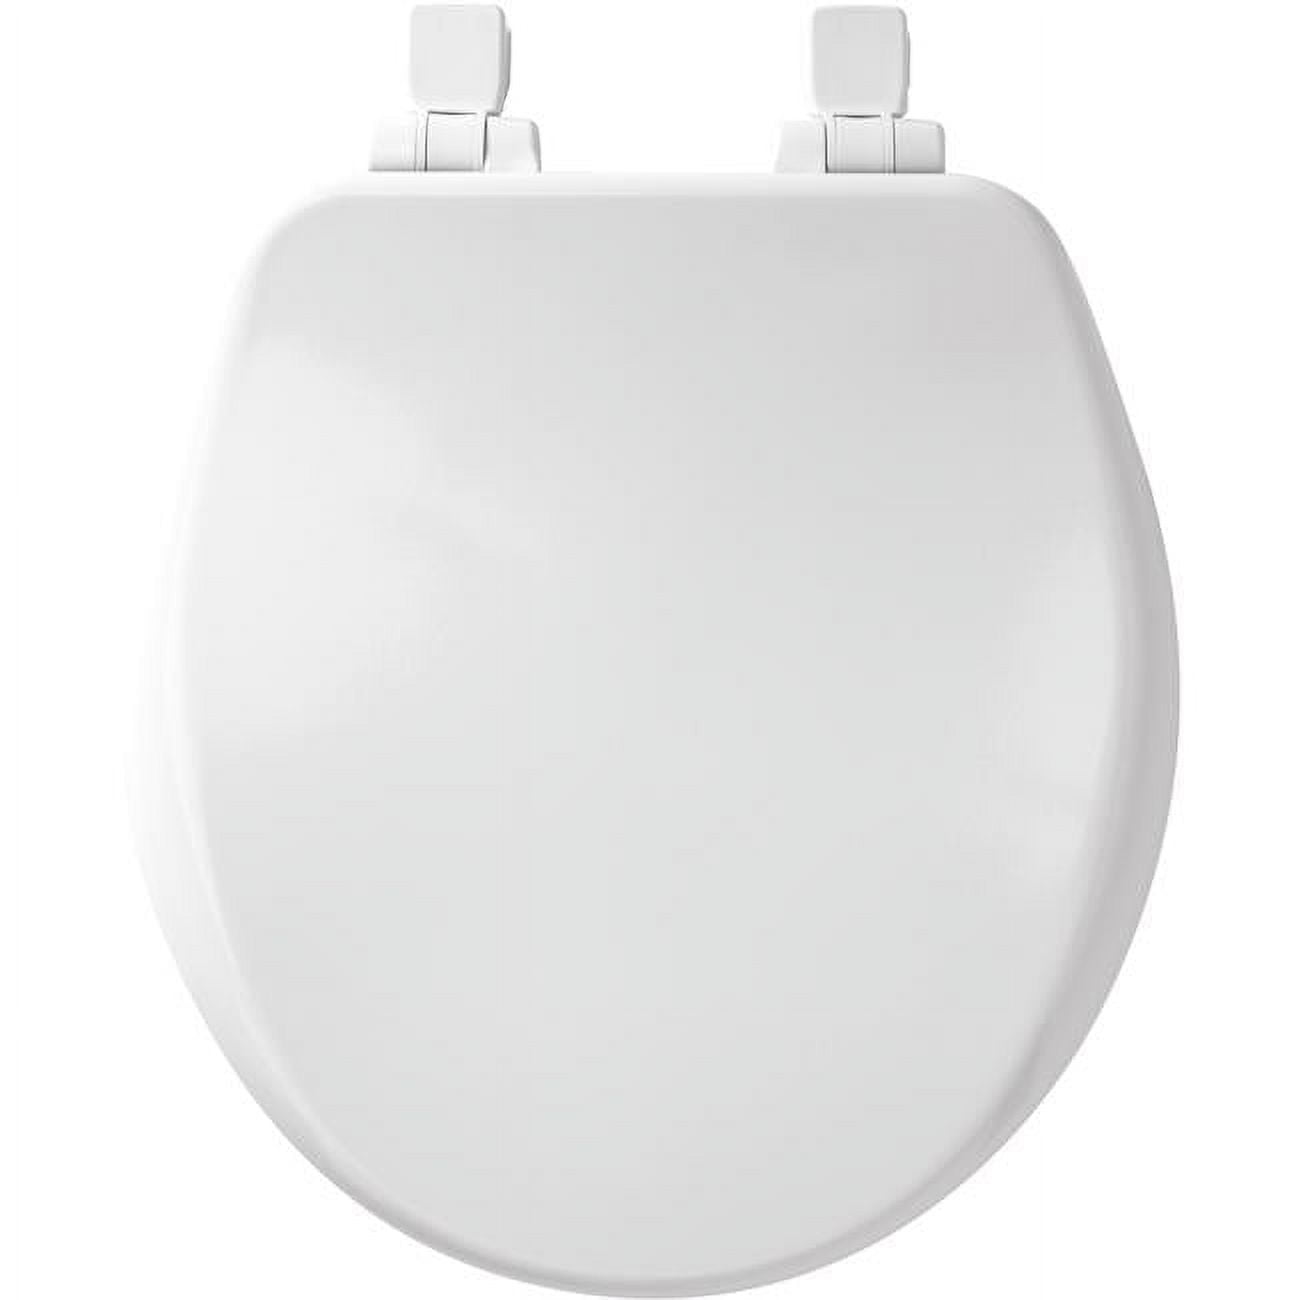 Picture of Mayfair 4001077 Slow Close Round White Enameled Wood Toilet Seat